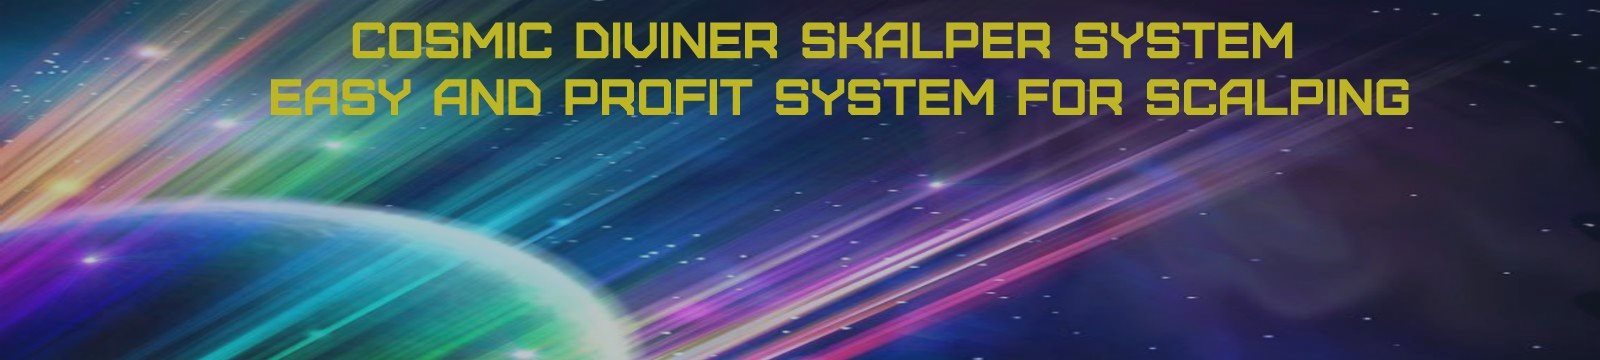 Cosmic Diviner Skalper System -  easy and profit system for scalping